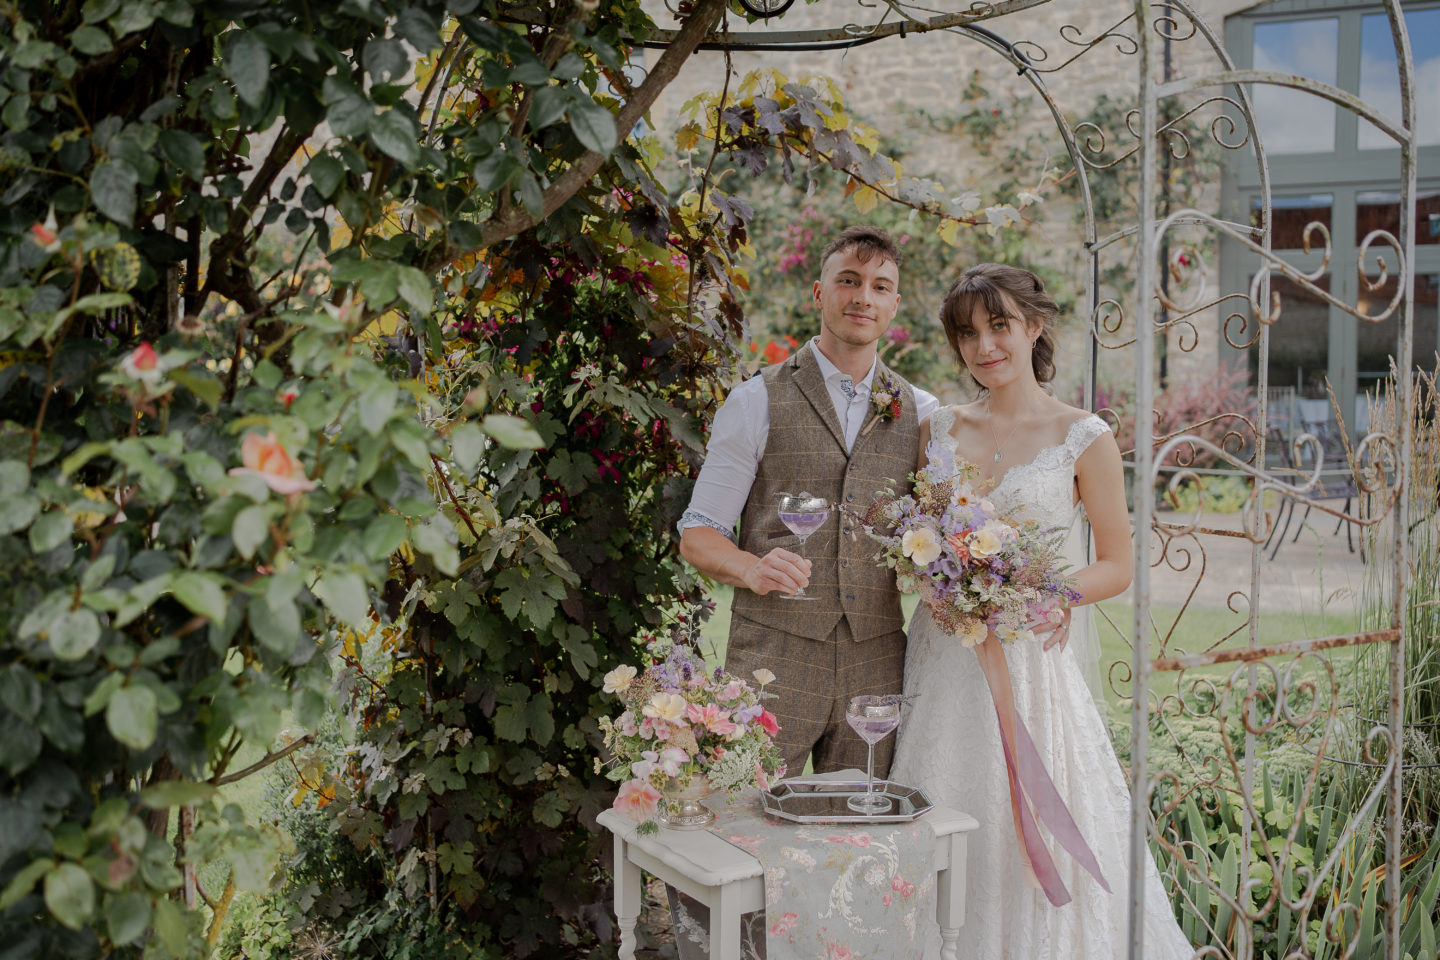 An Intimate Luxury Elopement With Romantic Vibes At Priston Mill, Somerset